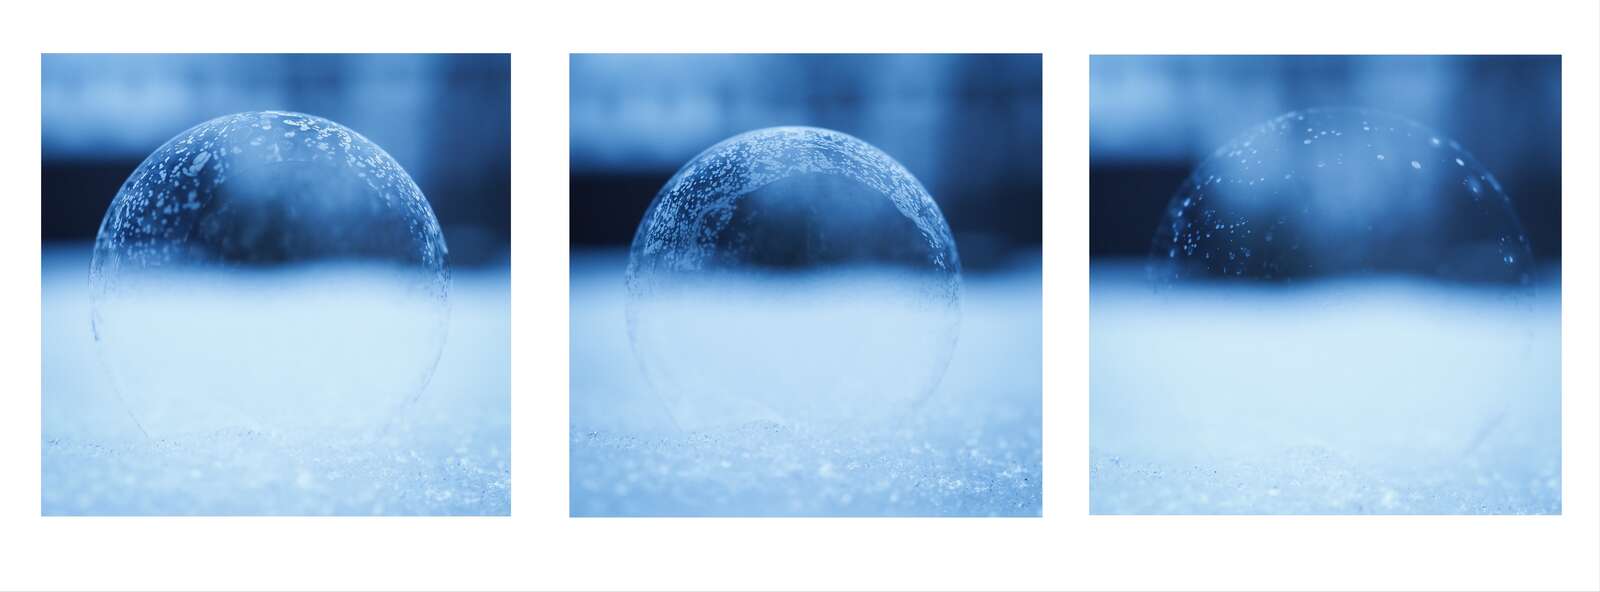 How to Capture a Photo of a Bubble Bursting